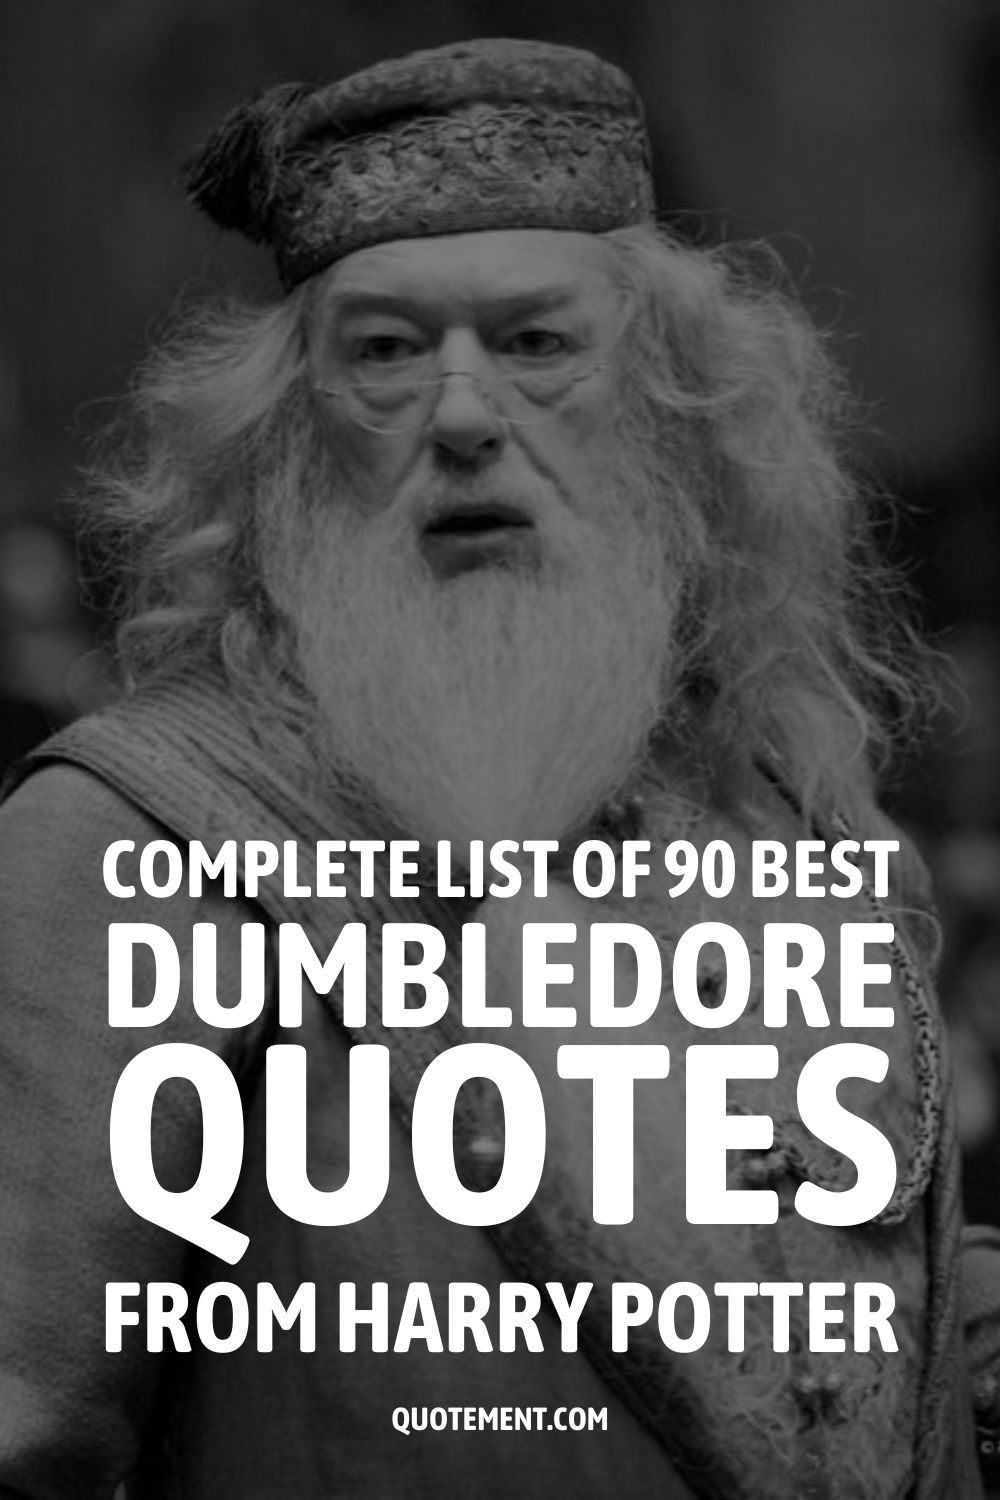 Complete List Of 90 Best Dumbledore Quotes From Harry Potter
